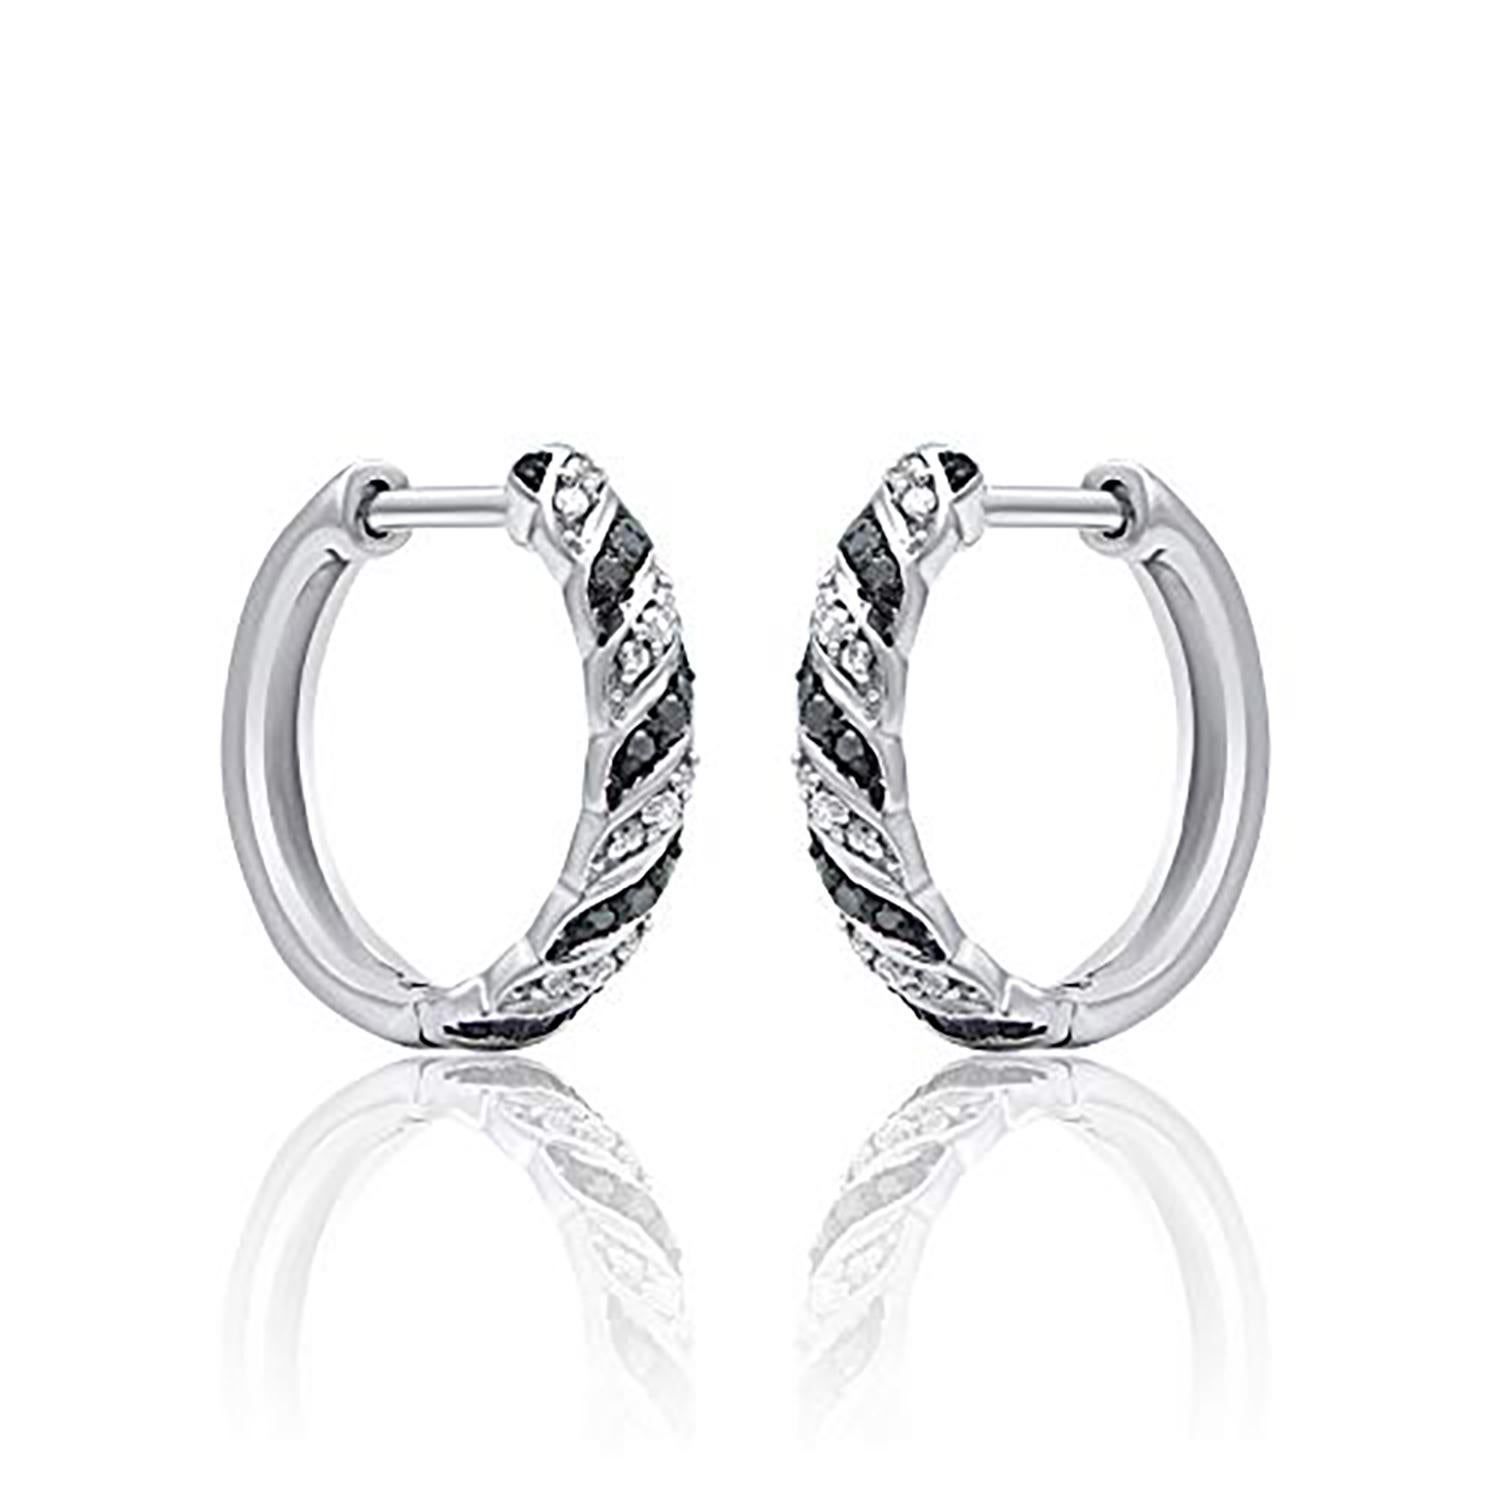 Classic and stylish diamond studded hoop earrings! perfect for daily wear. Crafted in 14 Karat white gold with 40 single cut diamond and black treated diamond in pave setting. These earring secure with hinged backs. The white diamonds are graded as